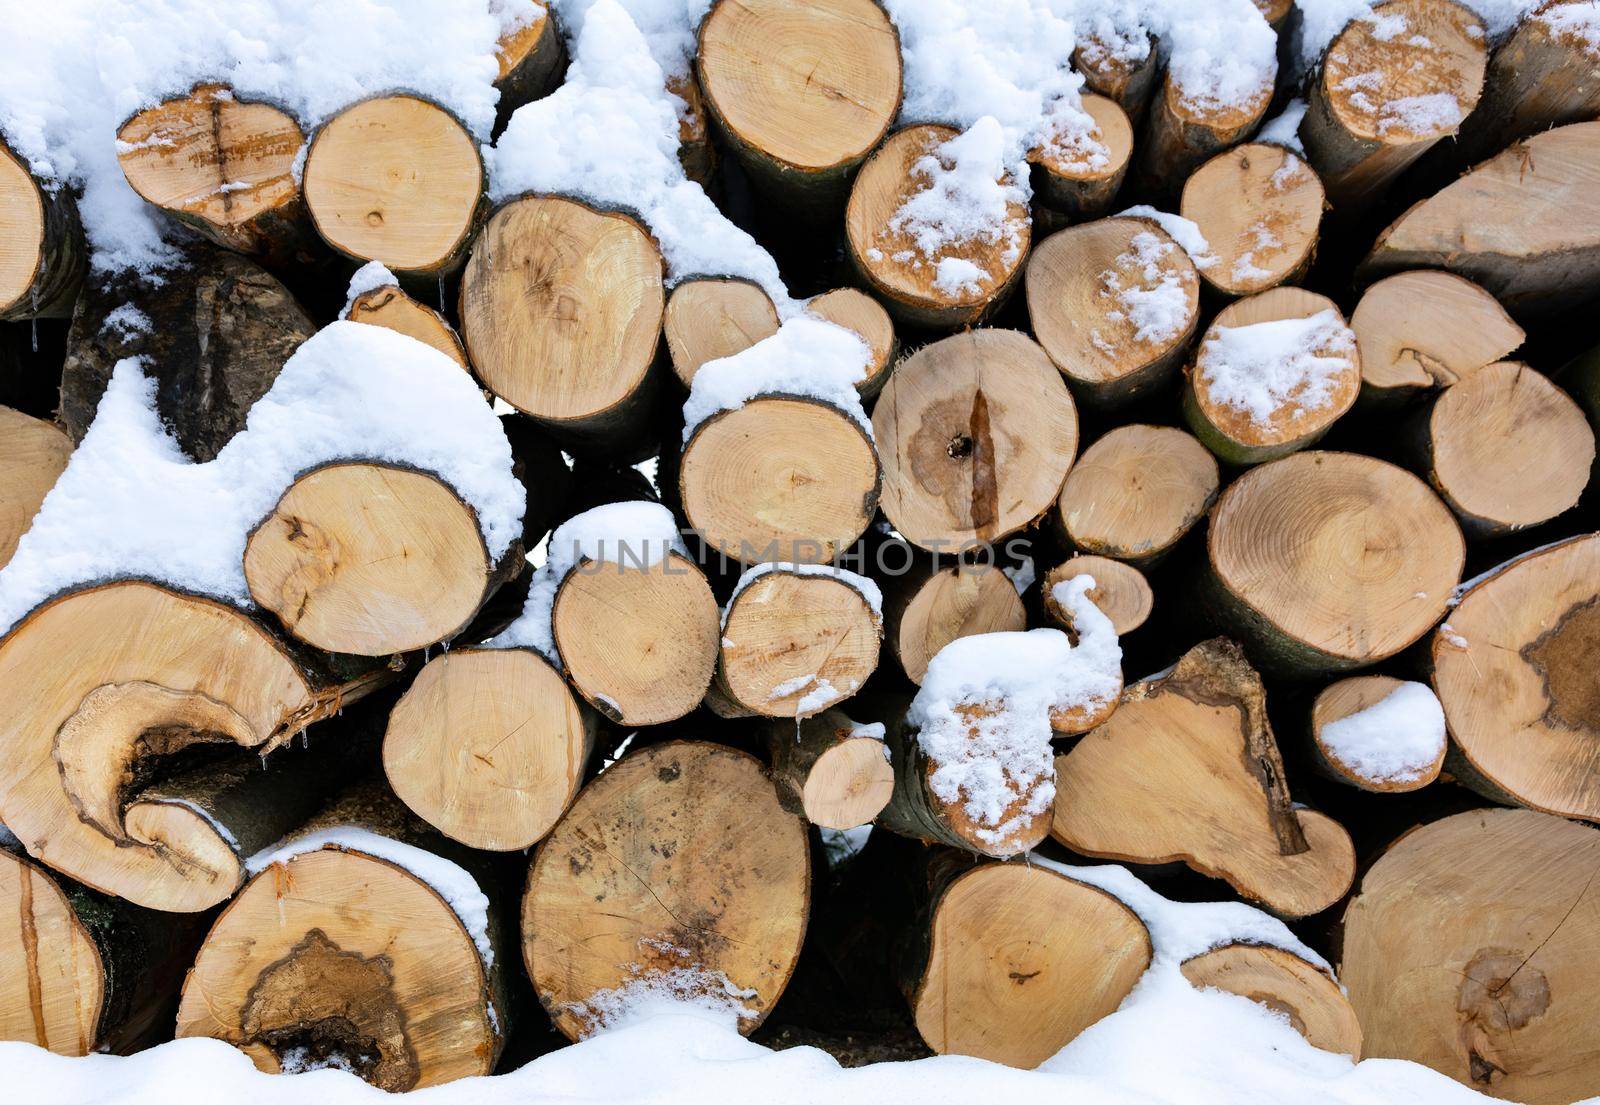 Firewood stacked in piles and covered with snow in the forest in close-up